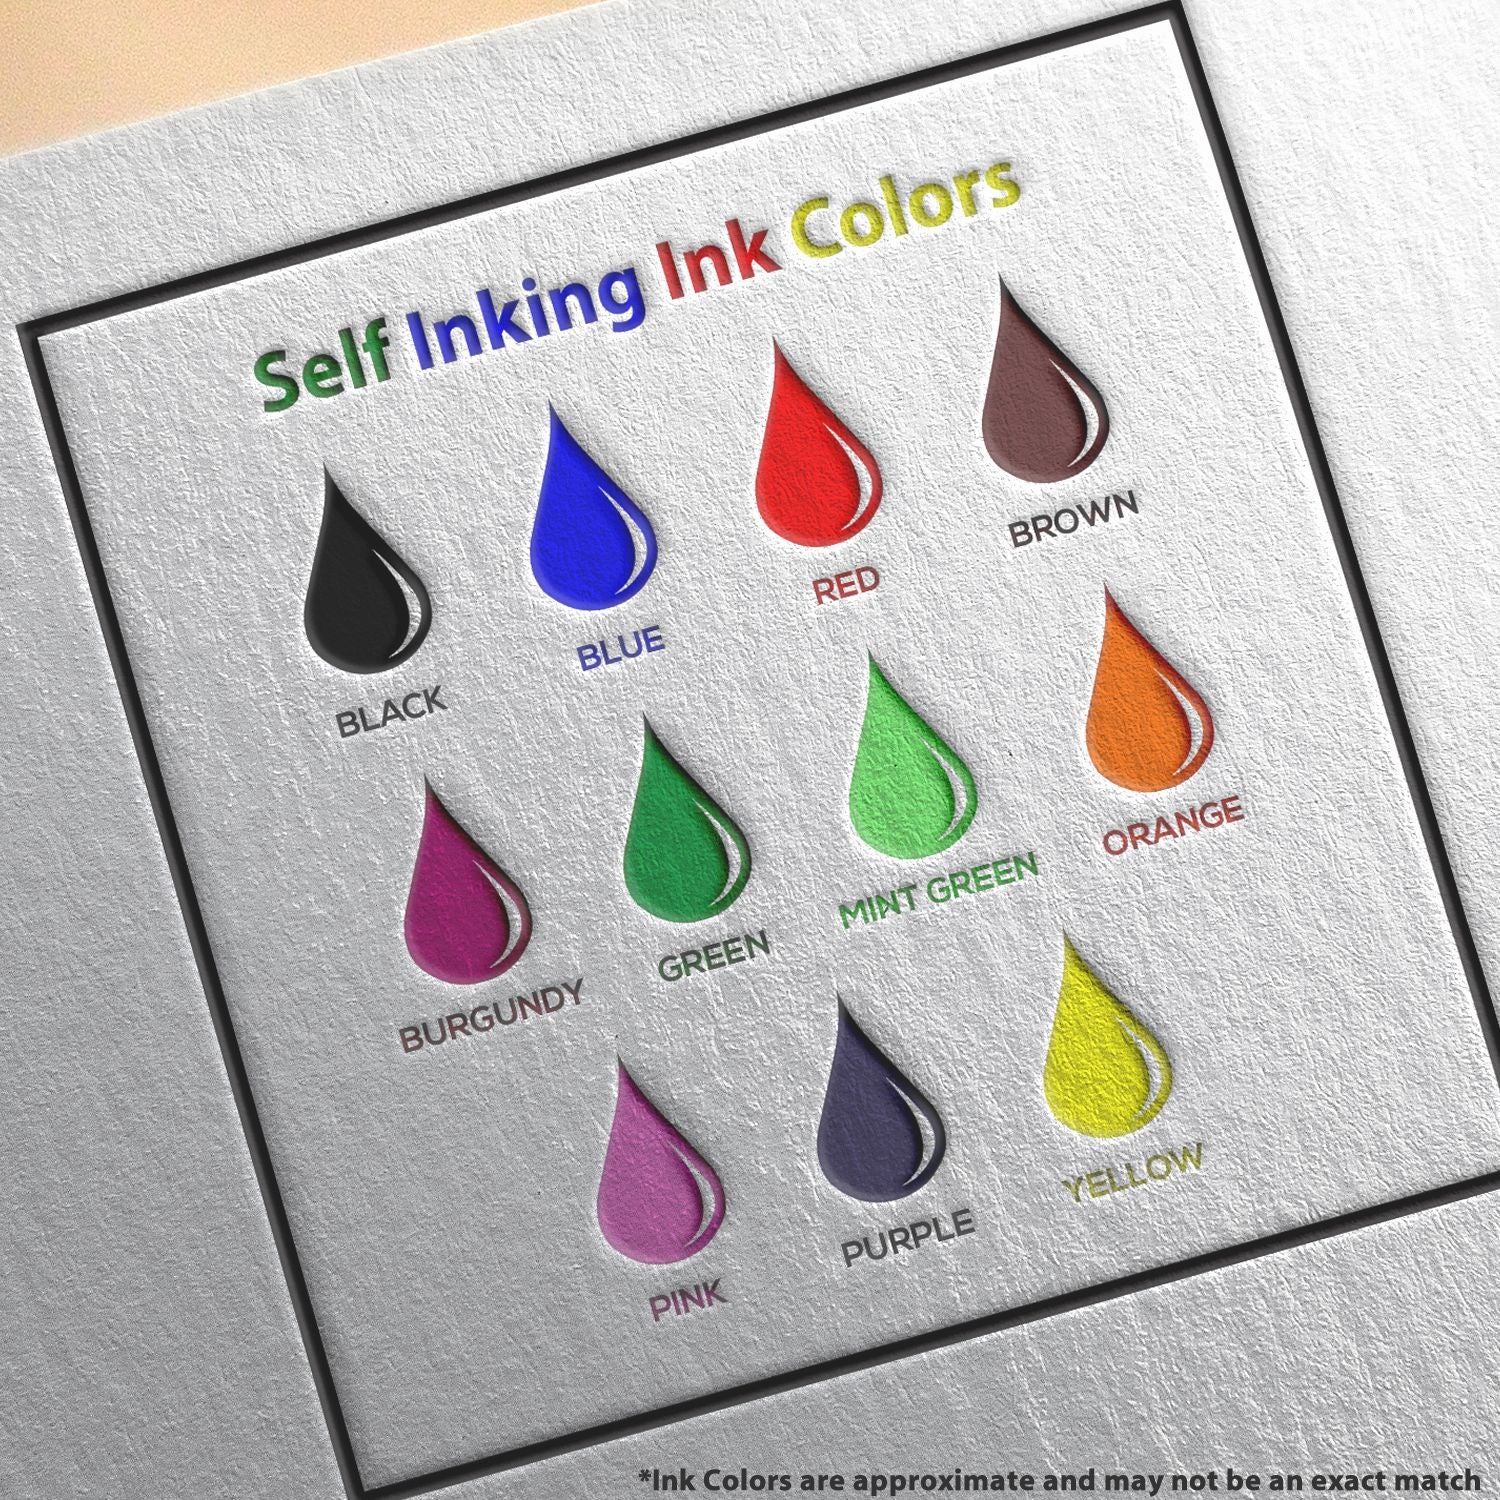 A picture showing the different ink colors or hues available for the Self-Inking Delaware Landscape Architect Stamp product.